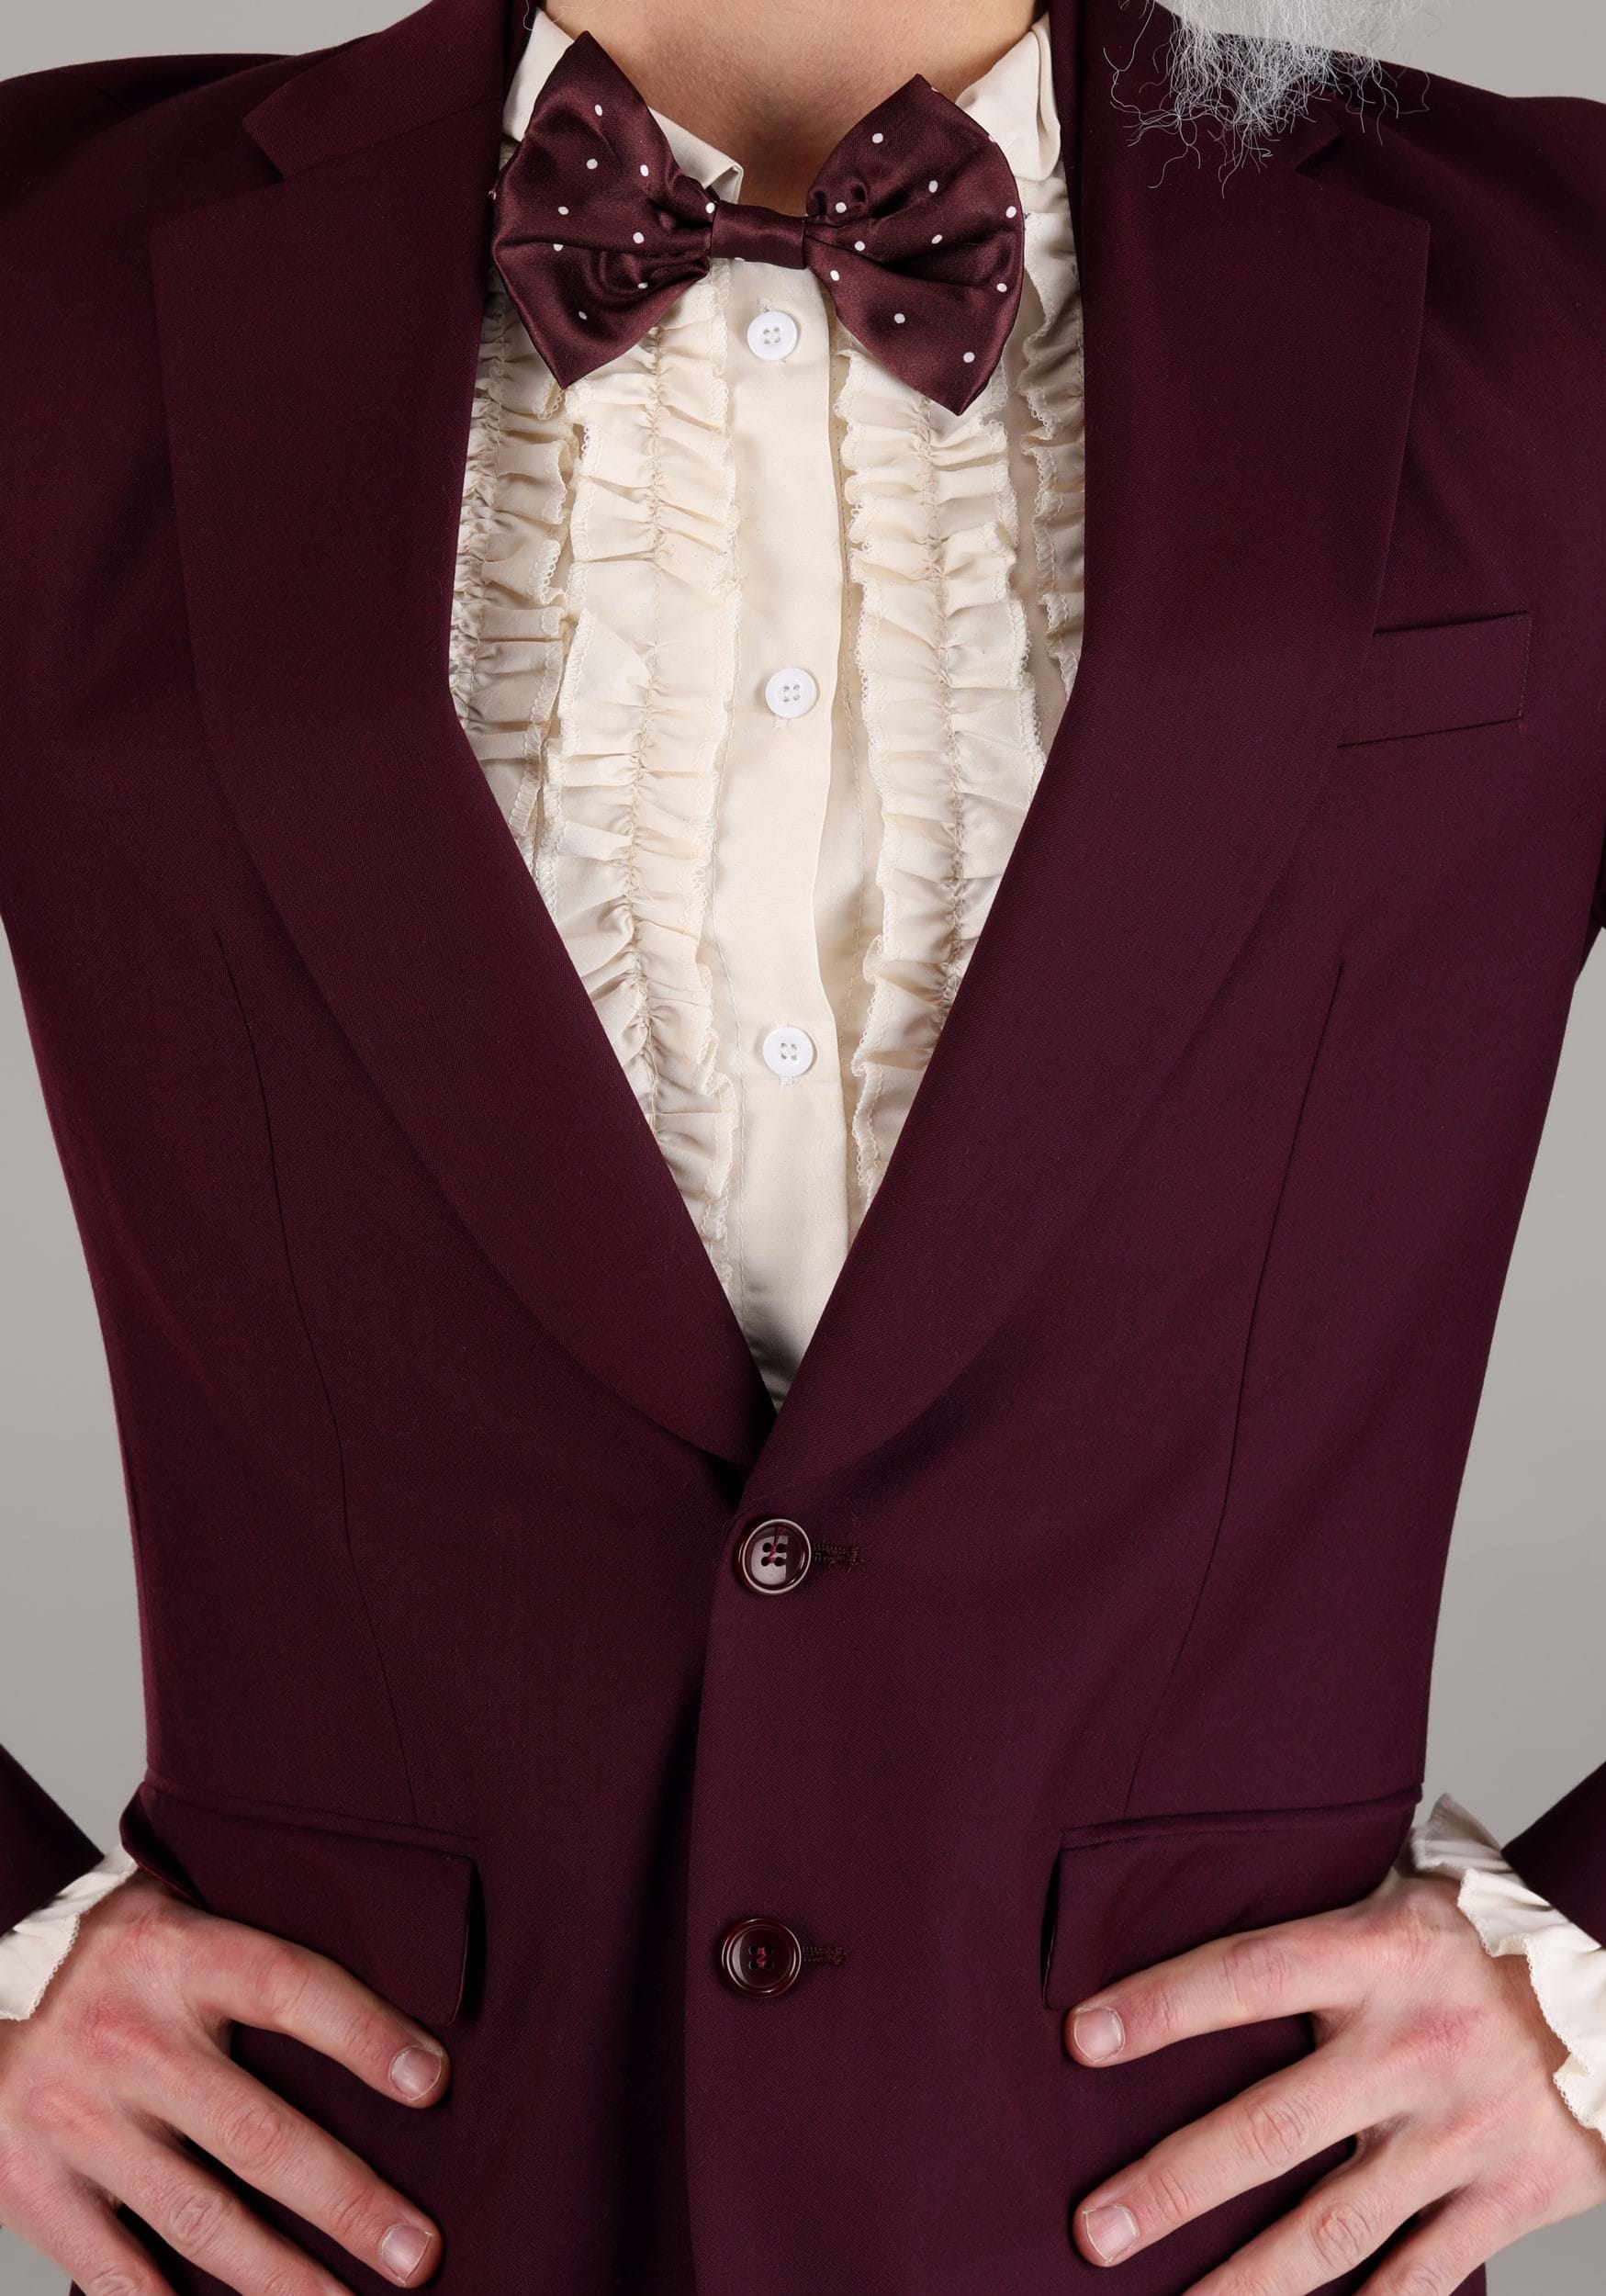 Beetlejuice Wedding Suit Shirt And Bow Tie For Men